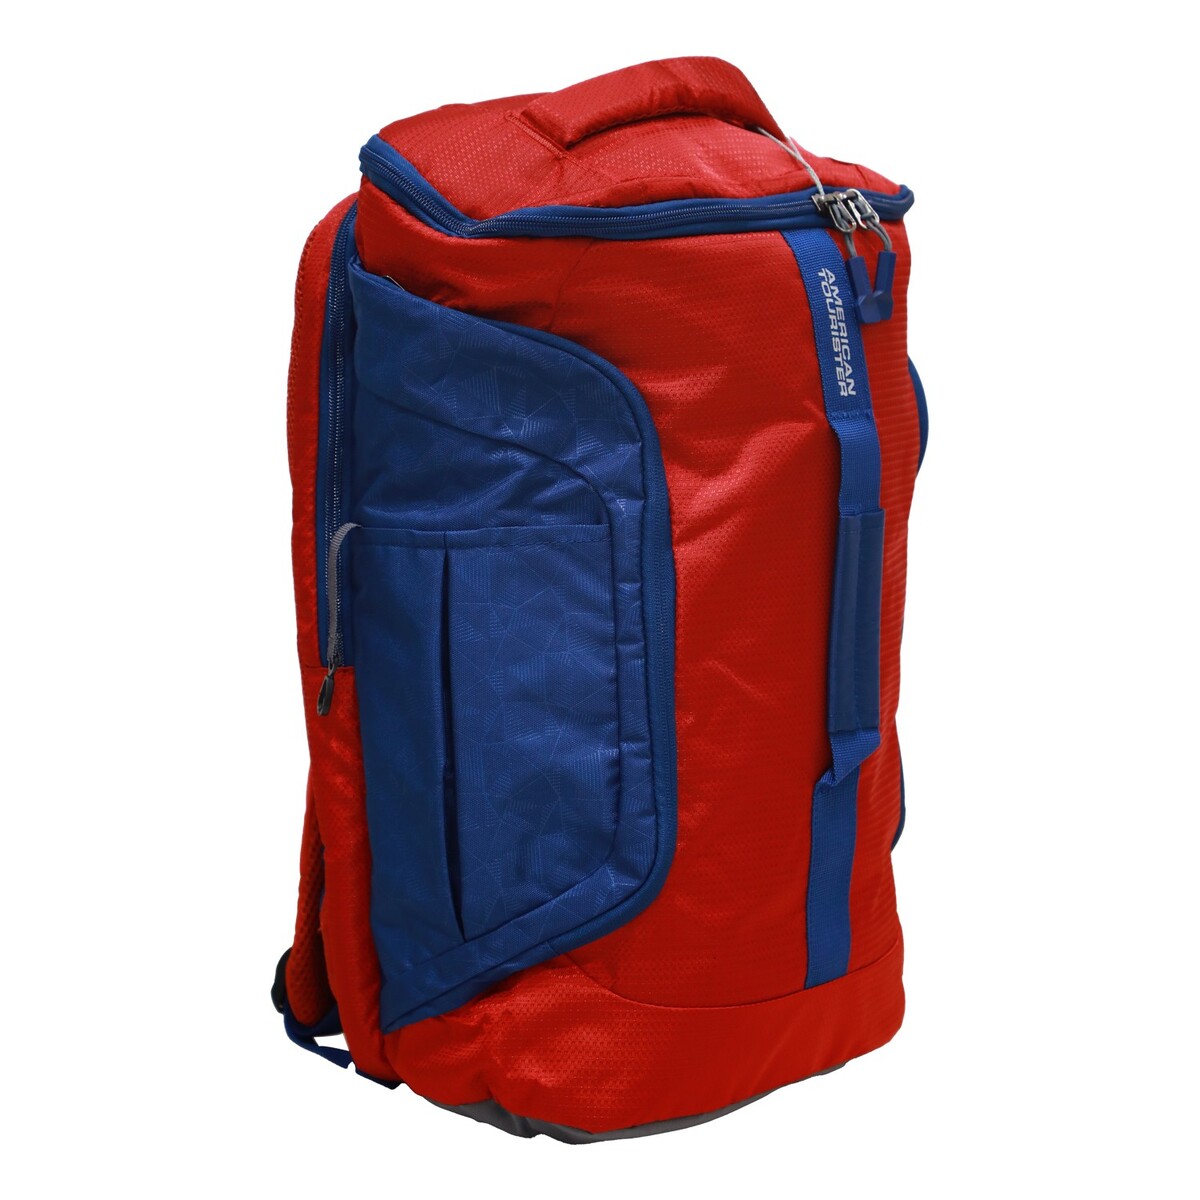 American Tourister Laptop Backpack Spur 02 Dp Red